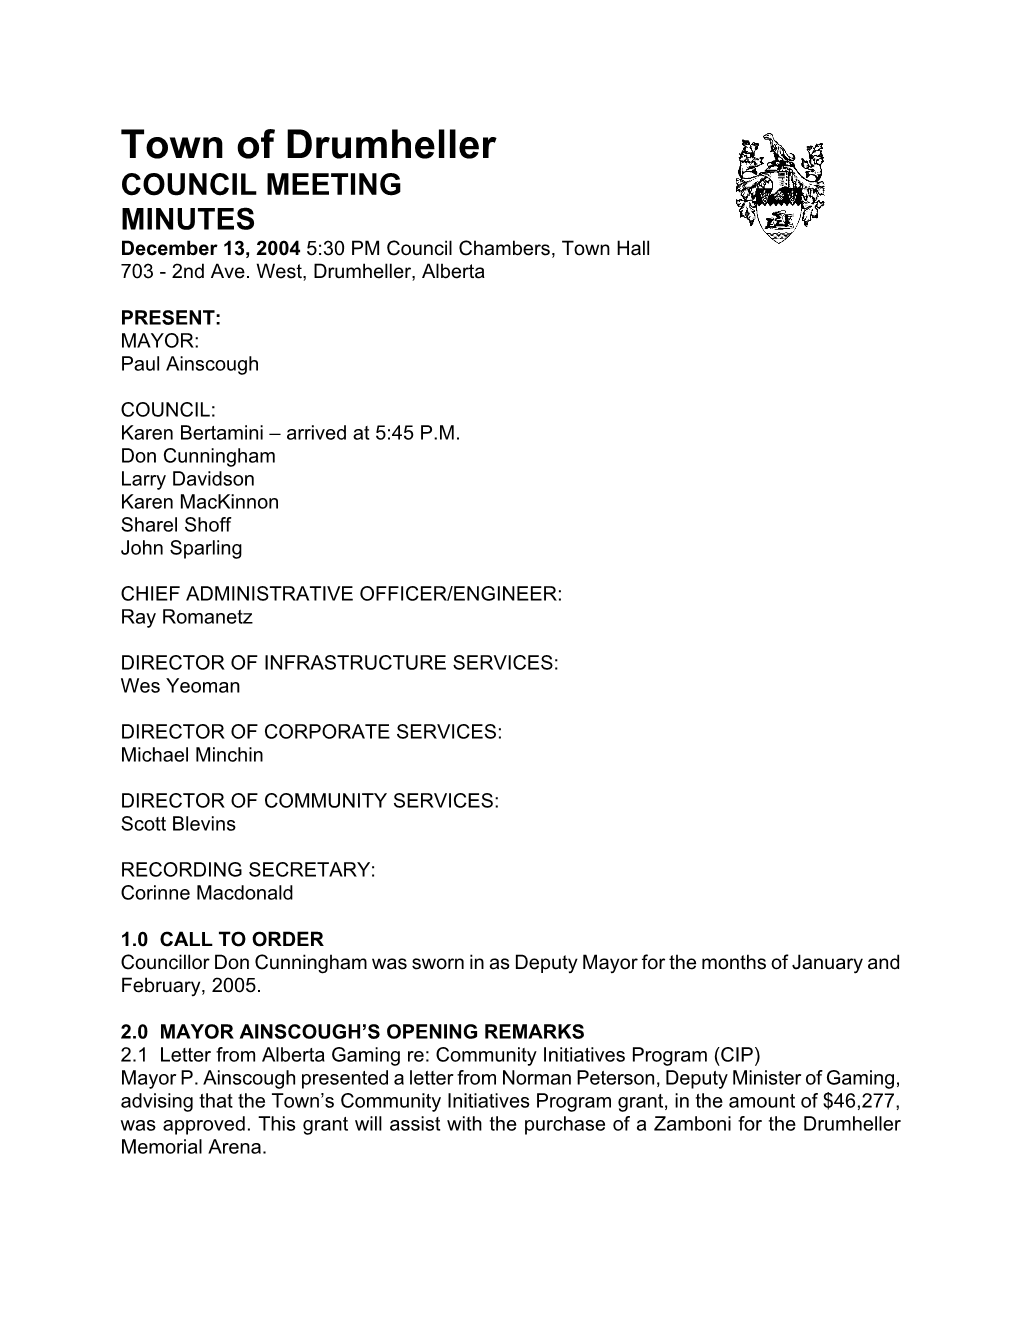 Town of Drumheller COUNCIL MEETING MINUTES December 13, 2004 5:30 PM Council Chambers, Town Hall 703 - 2Nd Ave